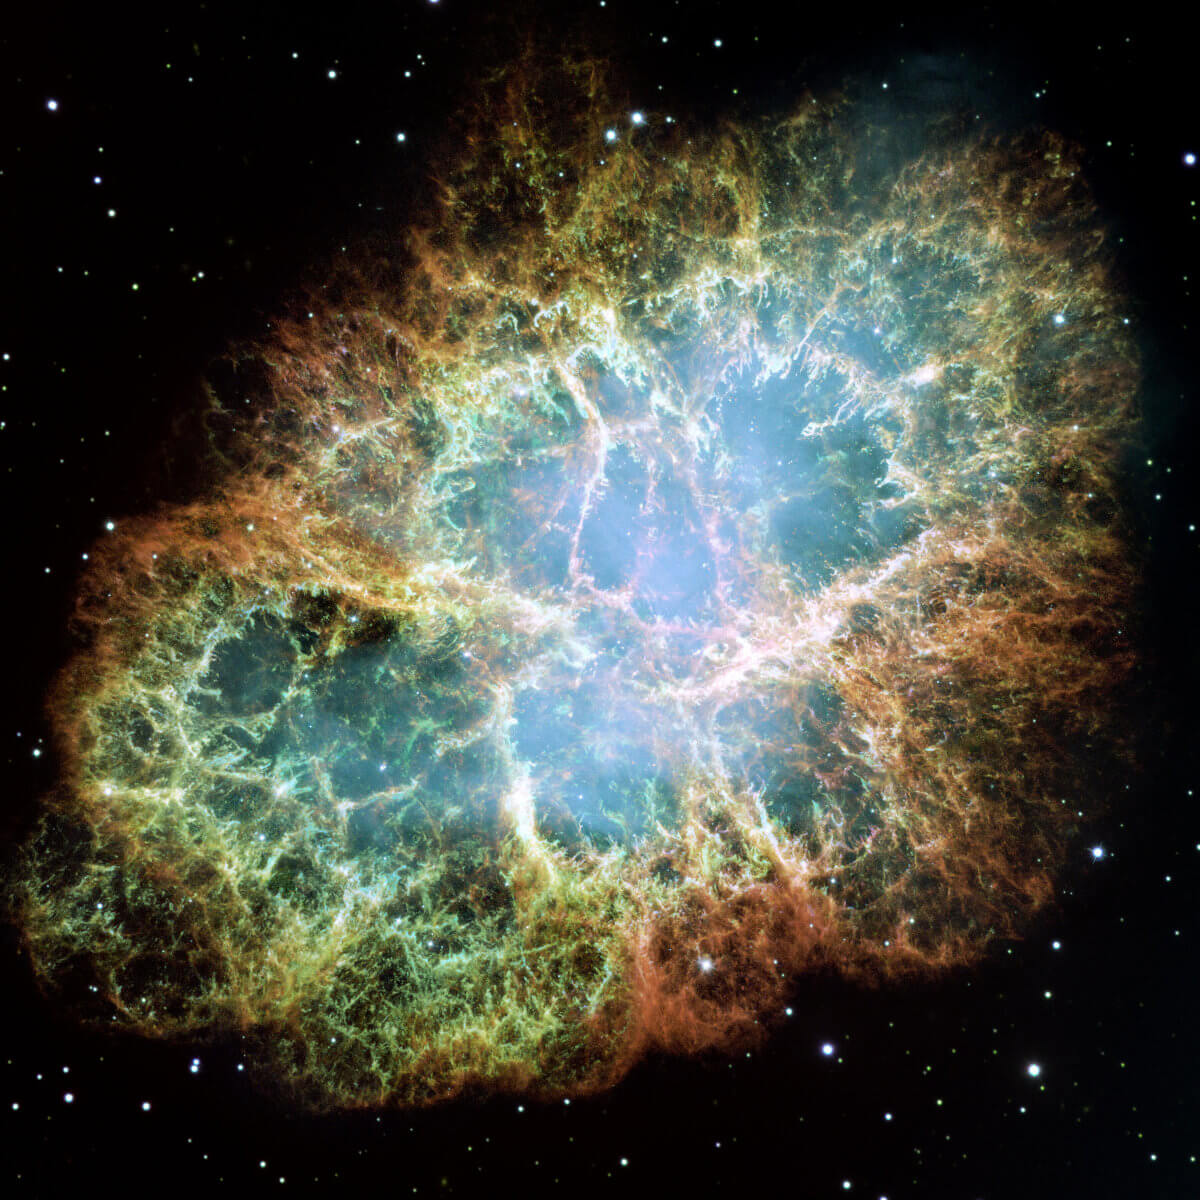 The Crab Nebula, the result of a supernova noted by Earth-bound chroniclers in 1054 A.D. Image Credit: NASA, ESA, J. Hester, A. Loll (ASU) https://www.nasa.gov/multimedia/imagegallery/image_feature_1604.html